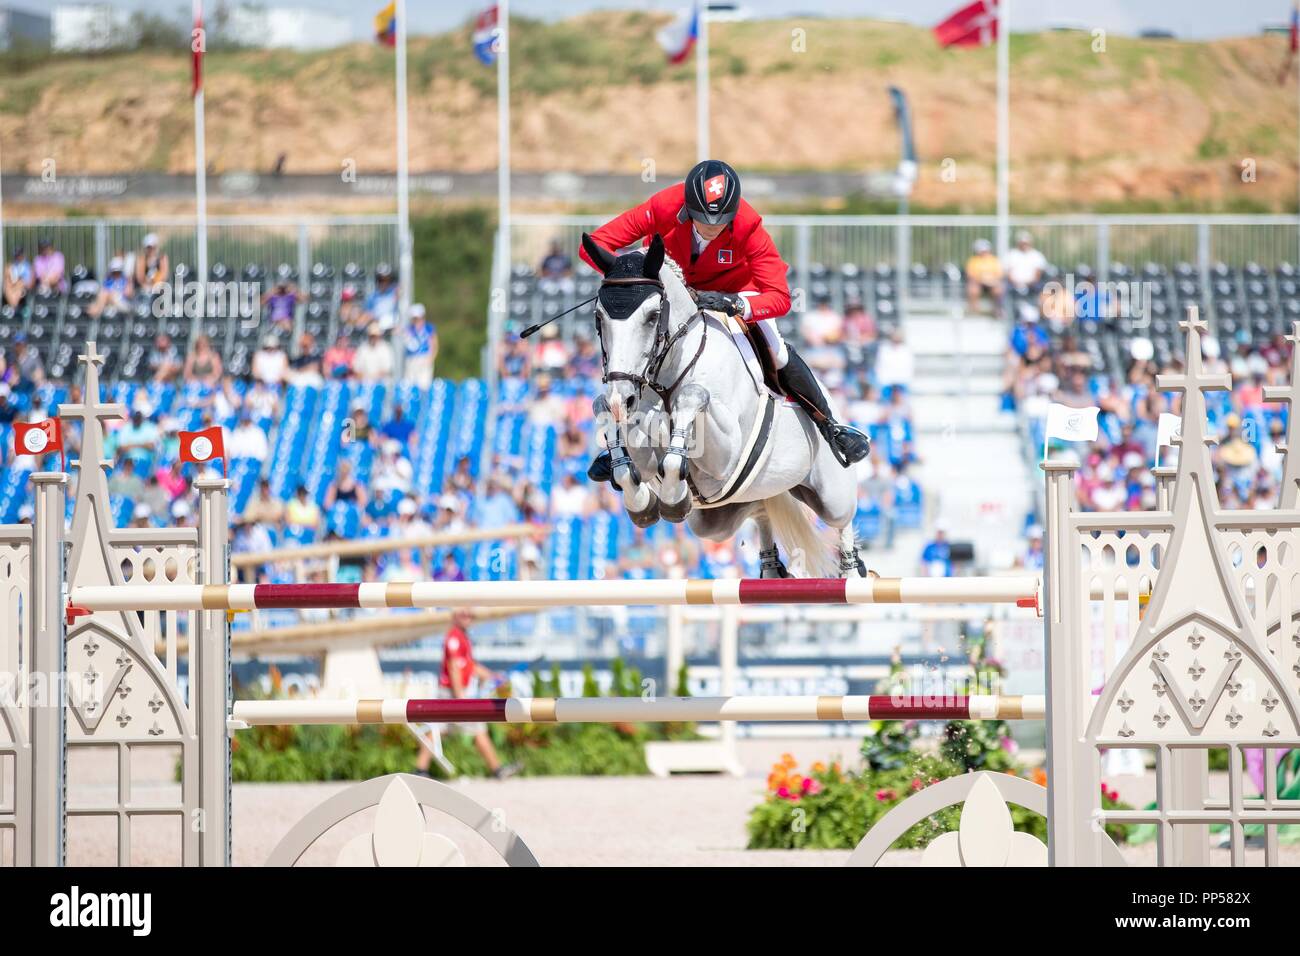 North Carolina, USA. 23rd Sept 2018. Martin Fuchs. Clooney. SUI. Show Jumping FEI World Individual Jumping Championship. Day 12. World Equestrian Games. WEG 2018 Tryon. North Carolina. USA. 23/09/2018. Credit: Sport In Pictures/Alamy Live News Stock Photo